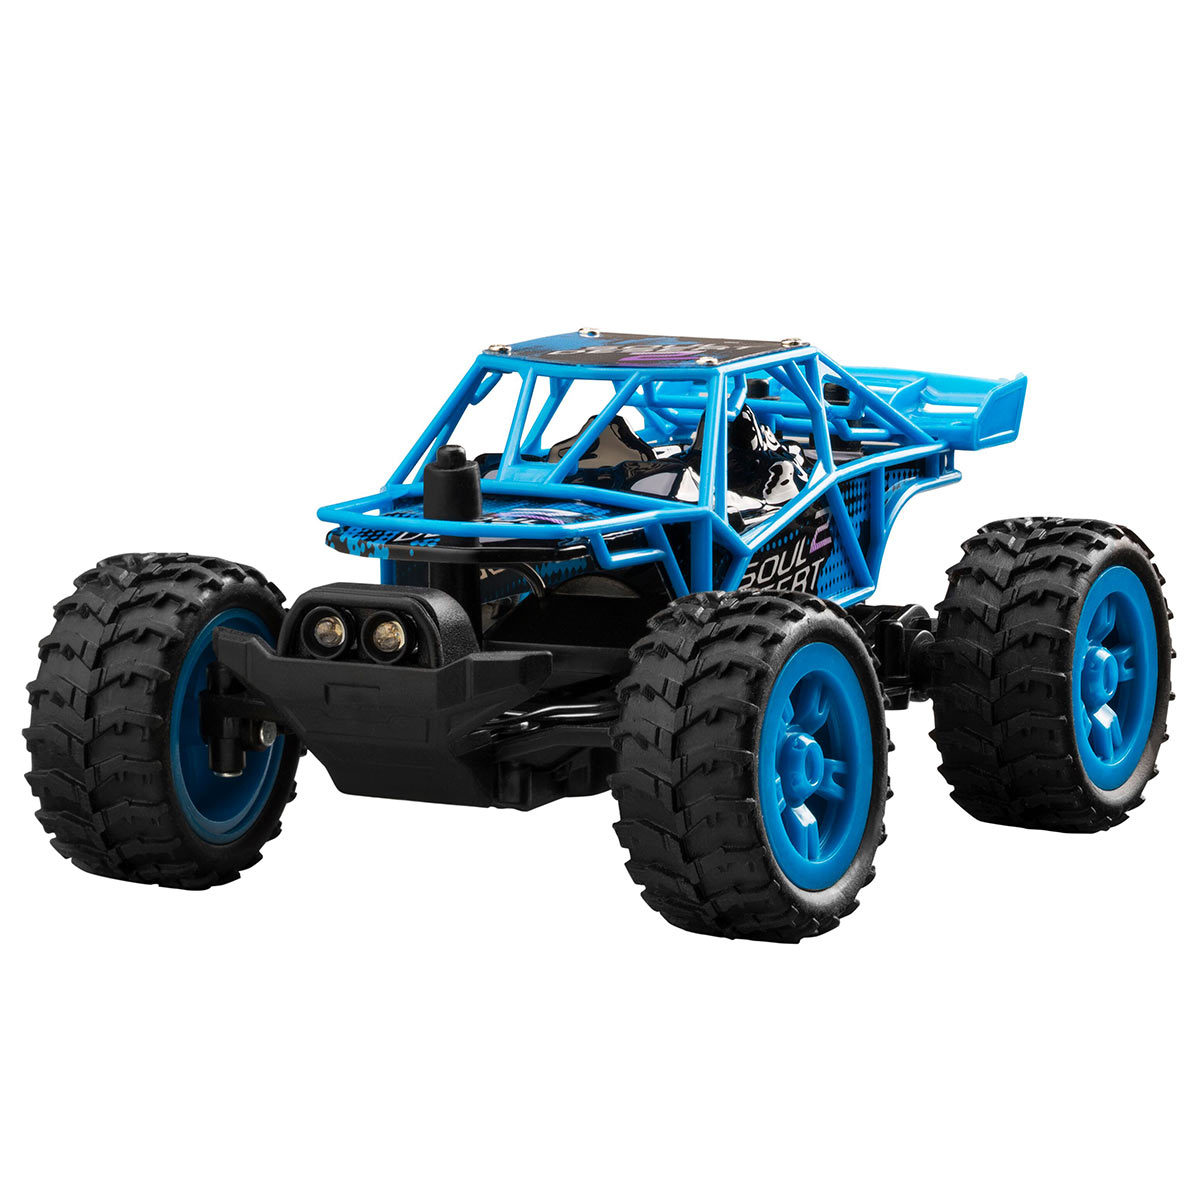 Propel Power craze rc in blue on white background